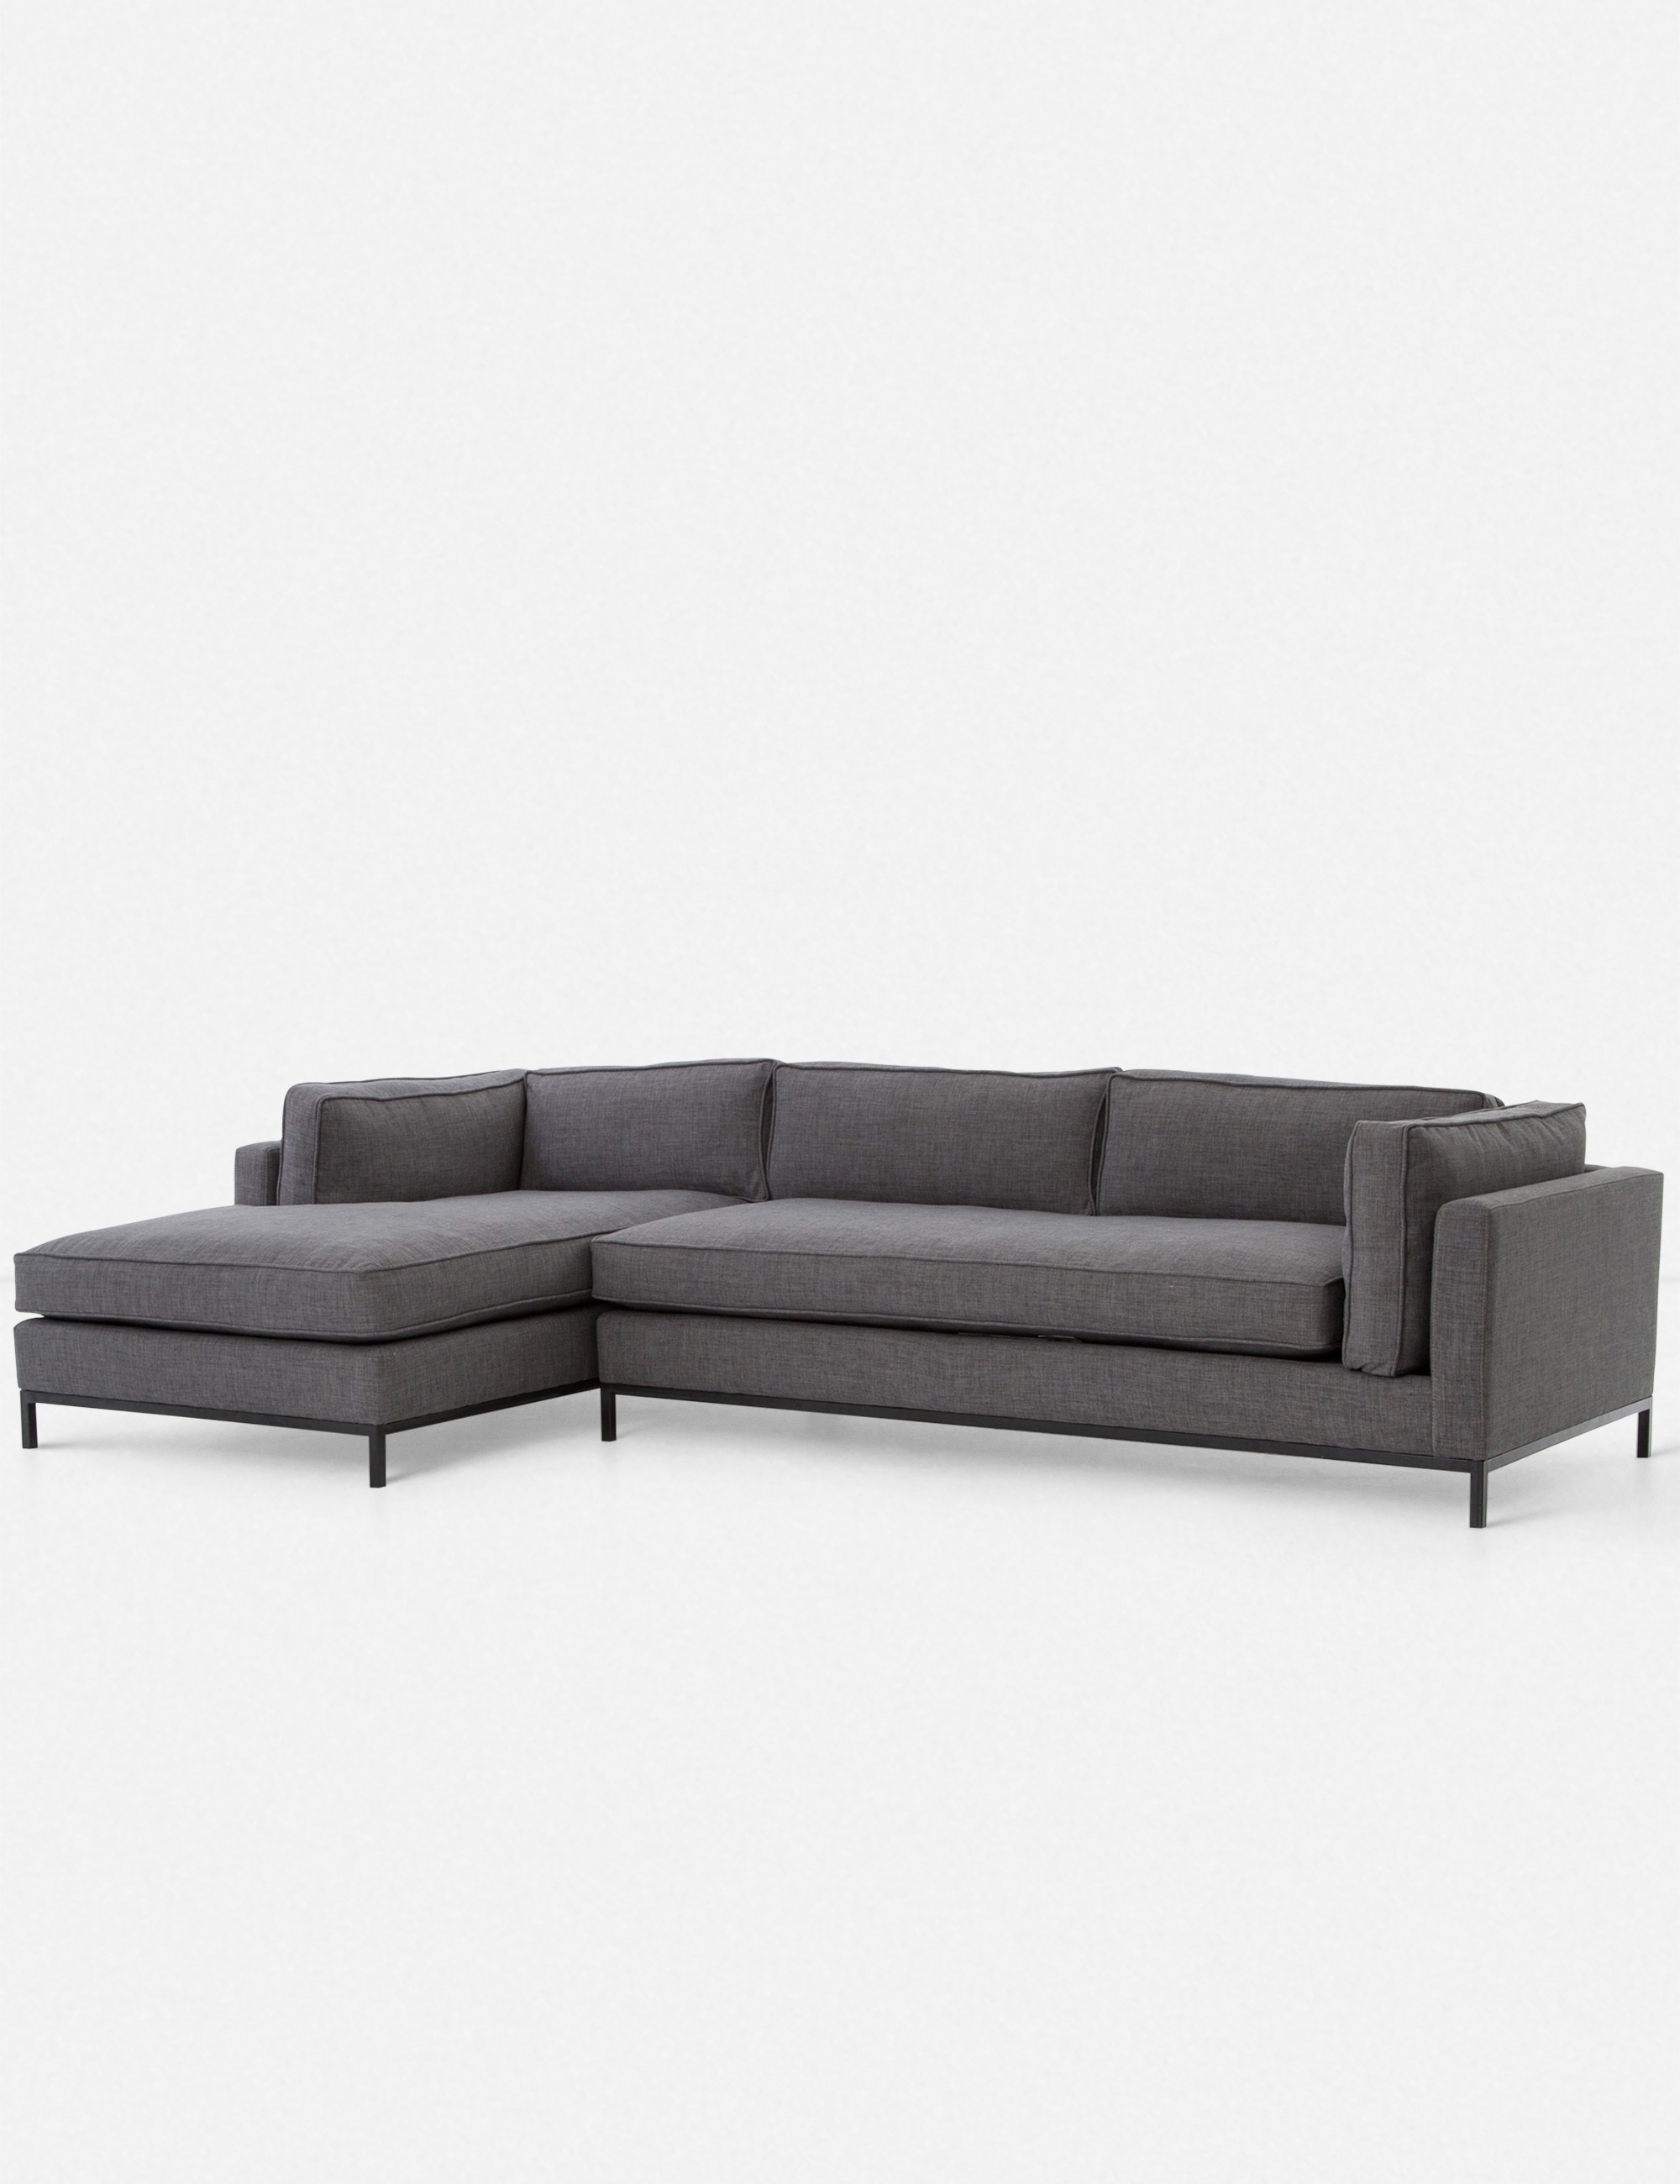 Fritzie Sectional Sofa - Image 1